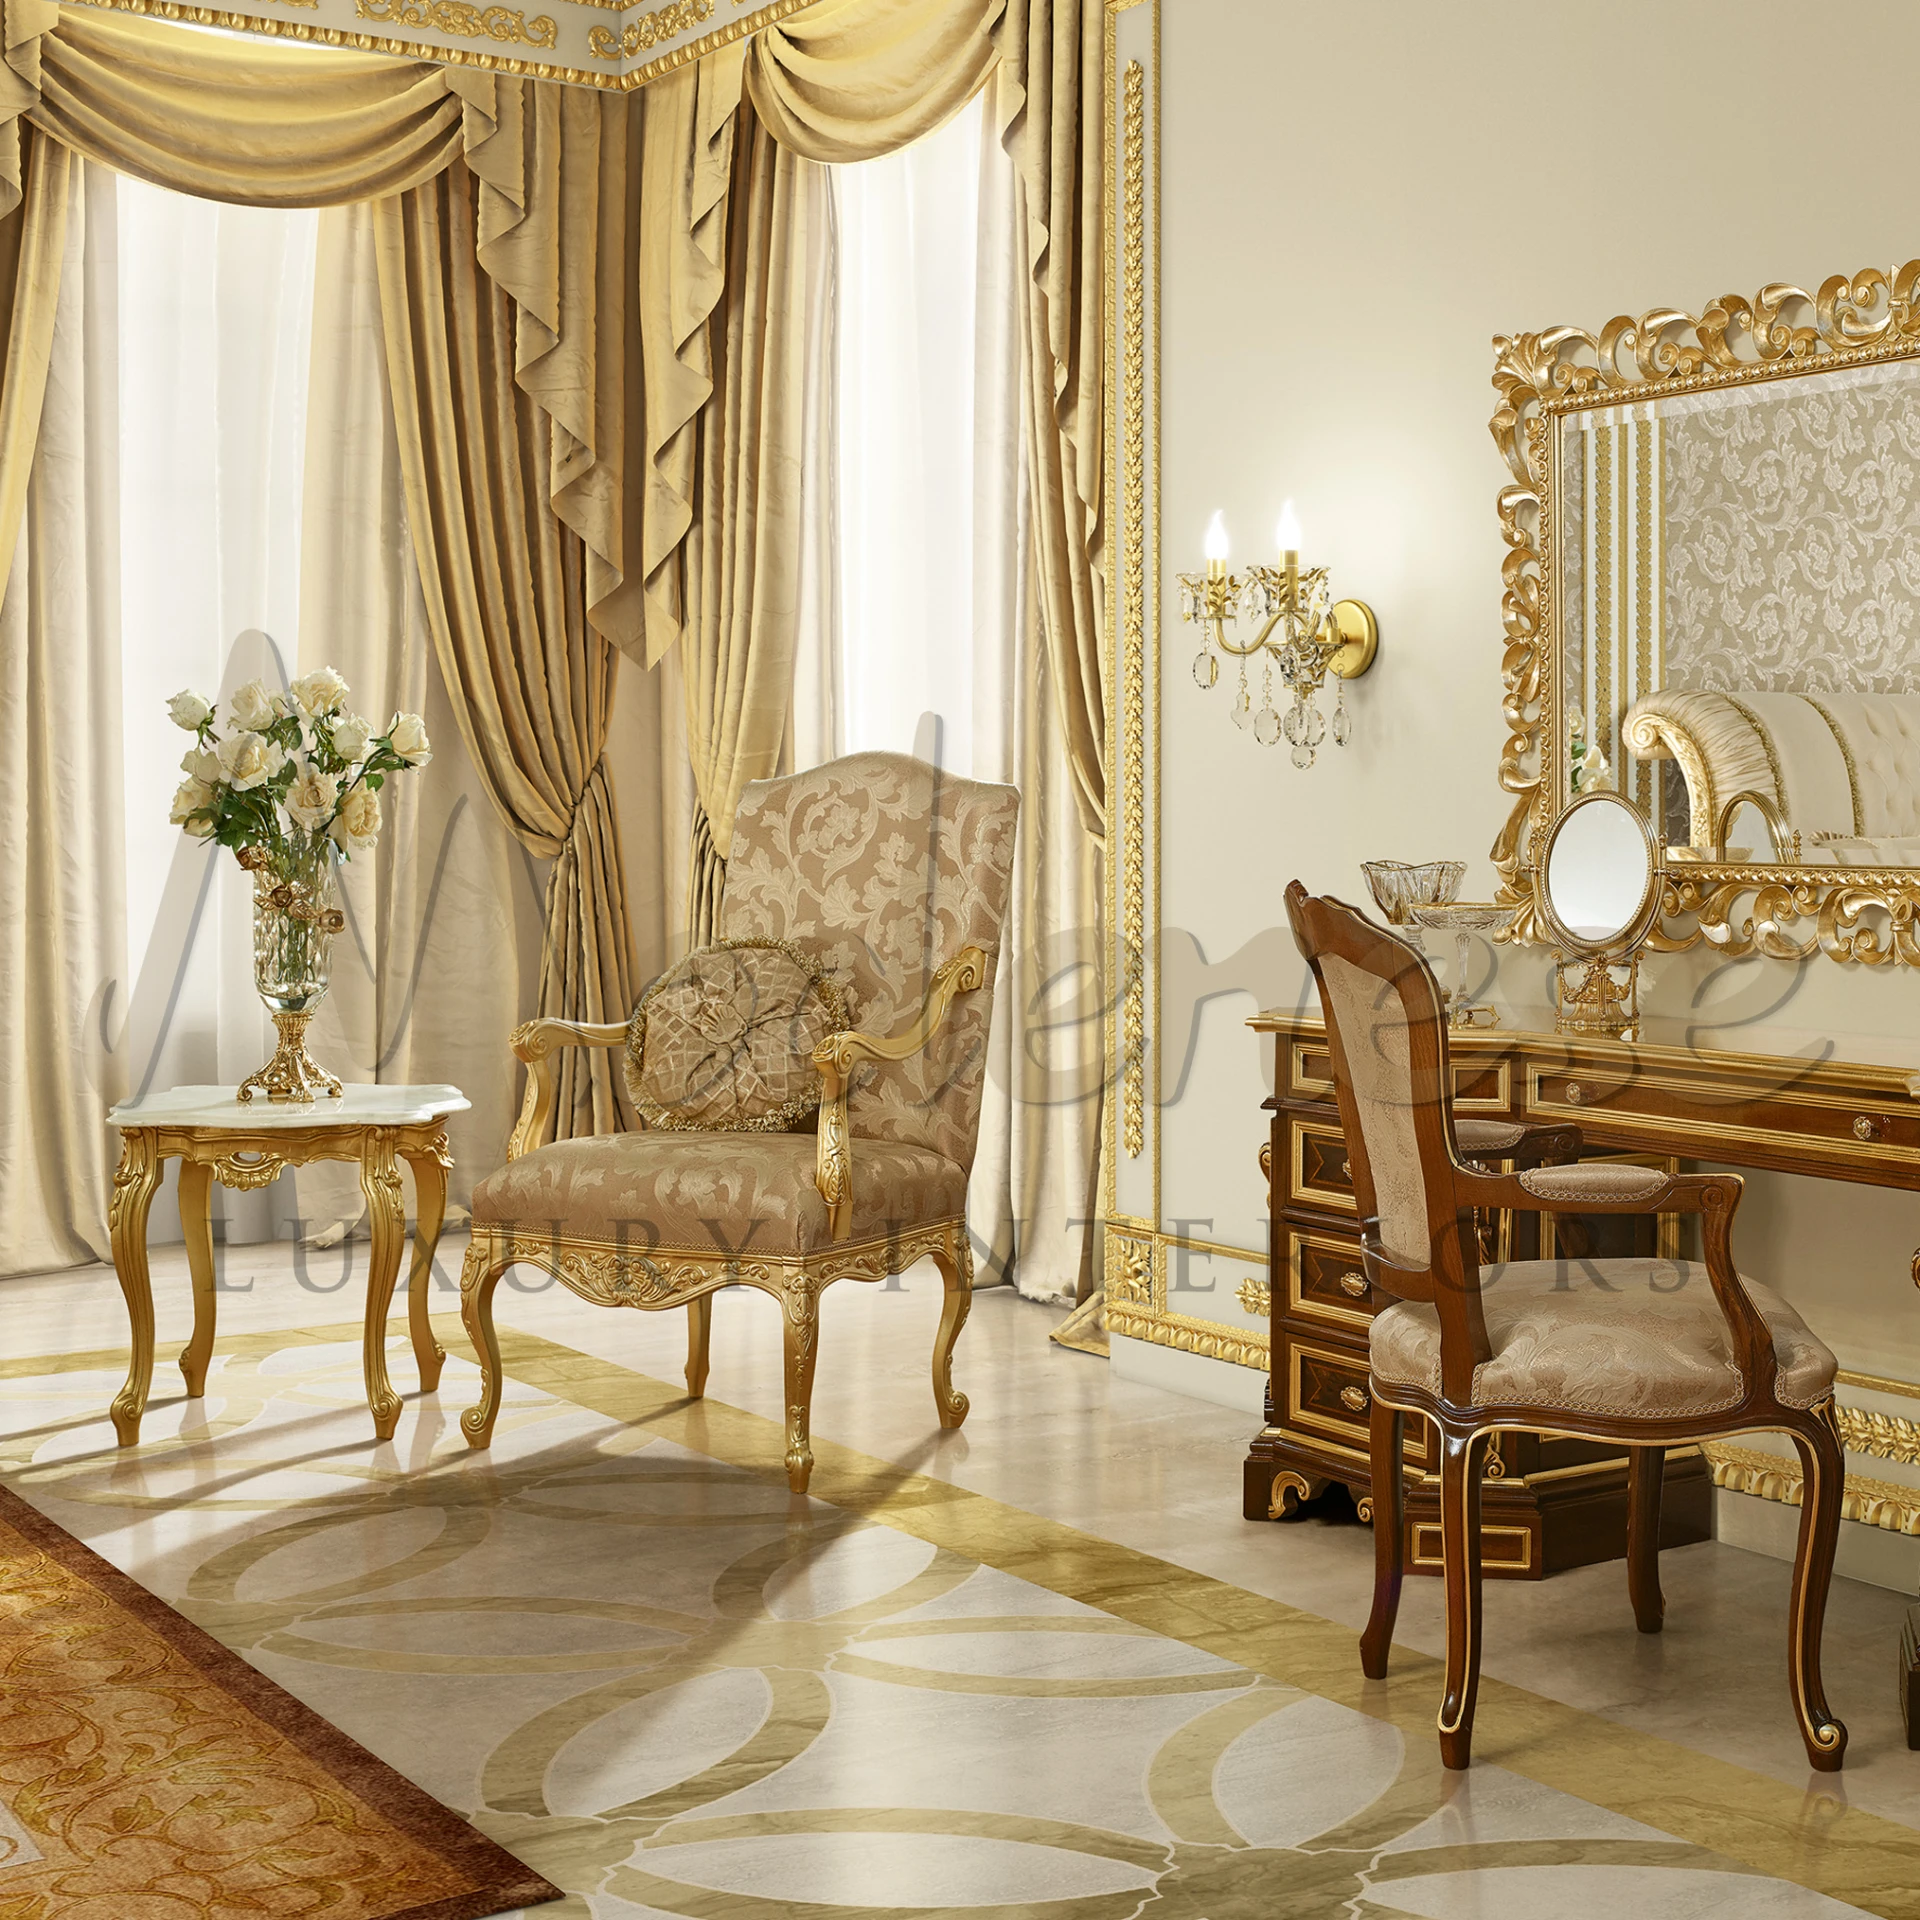 Vintage-inspired Gold Accent Chair for Elegant Interiors